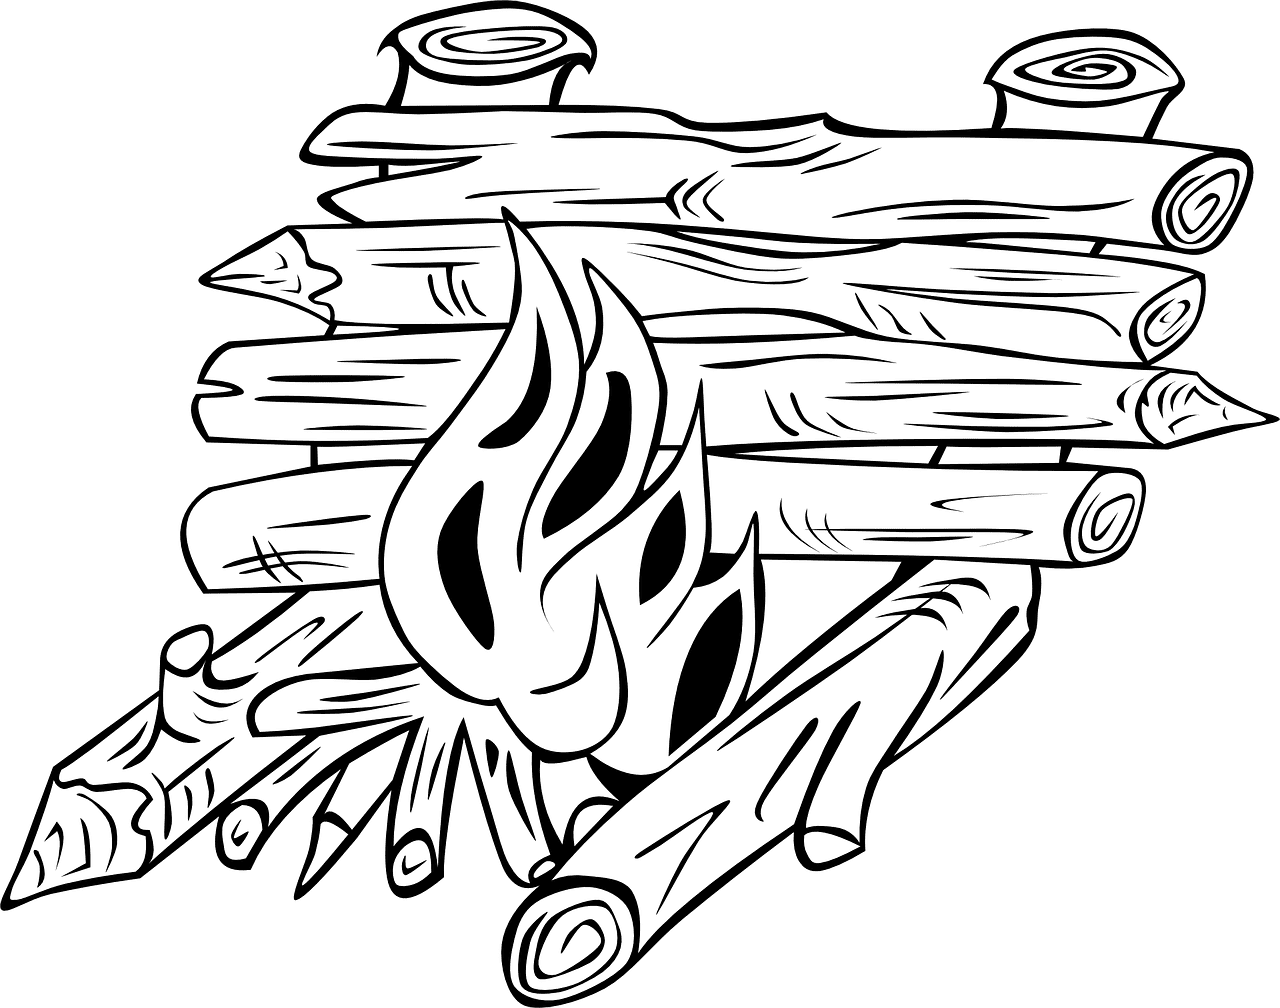 Campfires Camp Cooking Coloring Pages